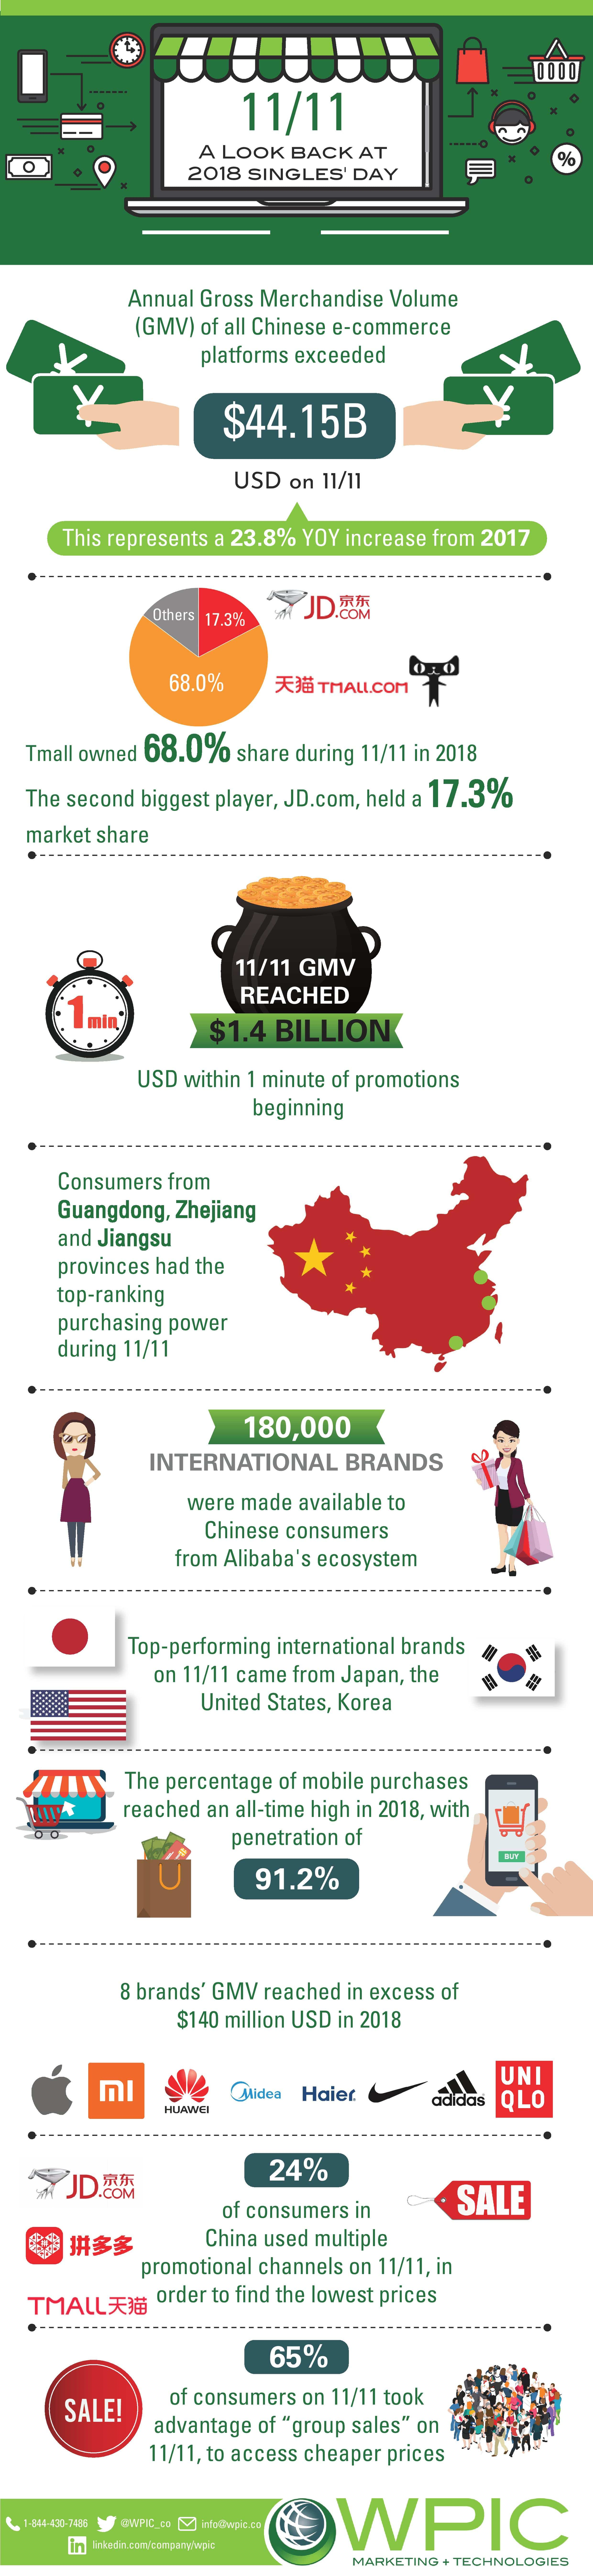 11/11 A look back at 2018 Singles' Day infographic